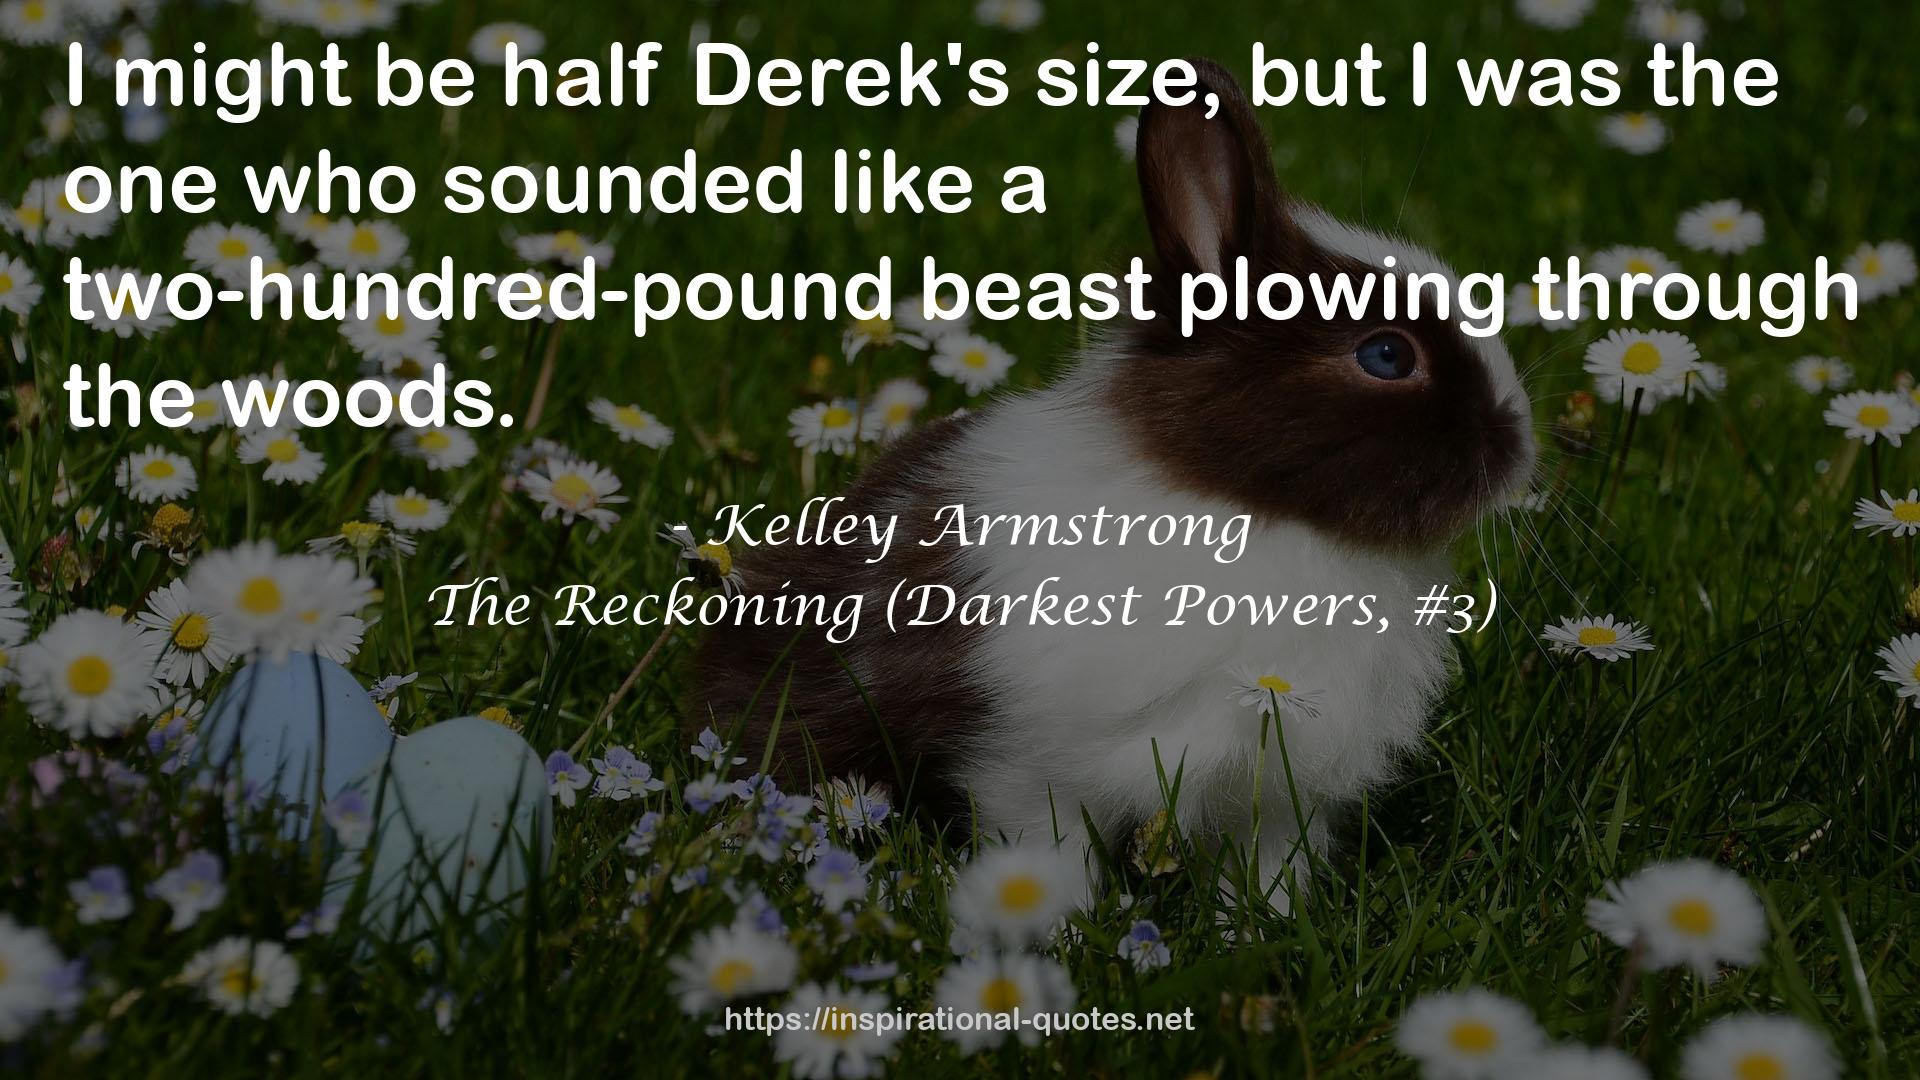 The Reckoning (Darkest Powers, #3) QUOTES